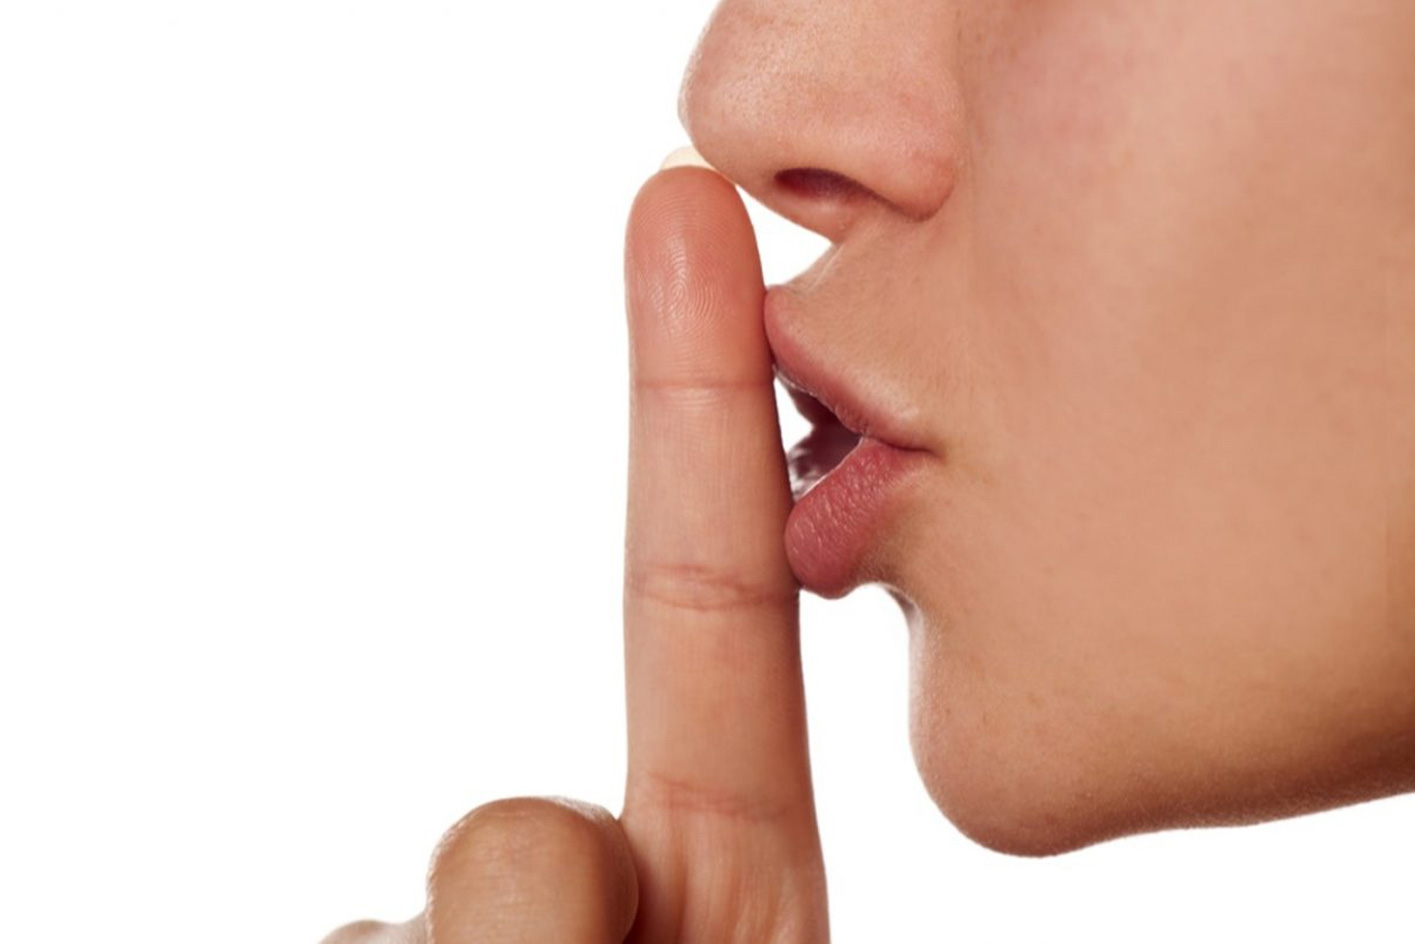 What does investing through your nose actually mean